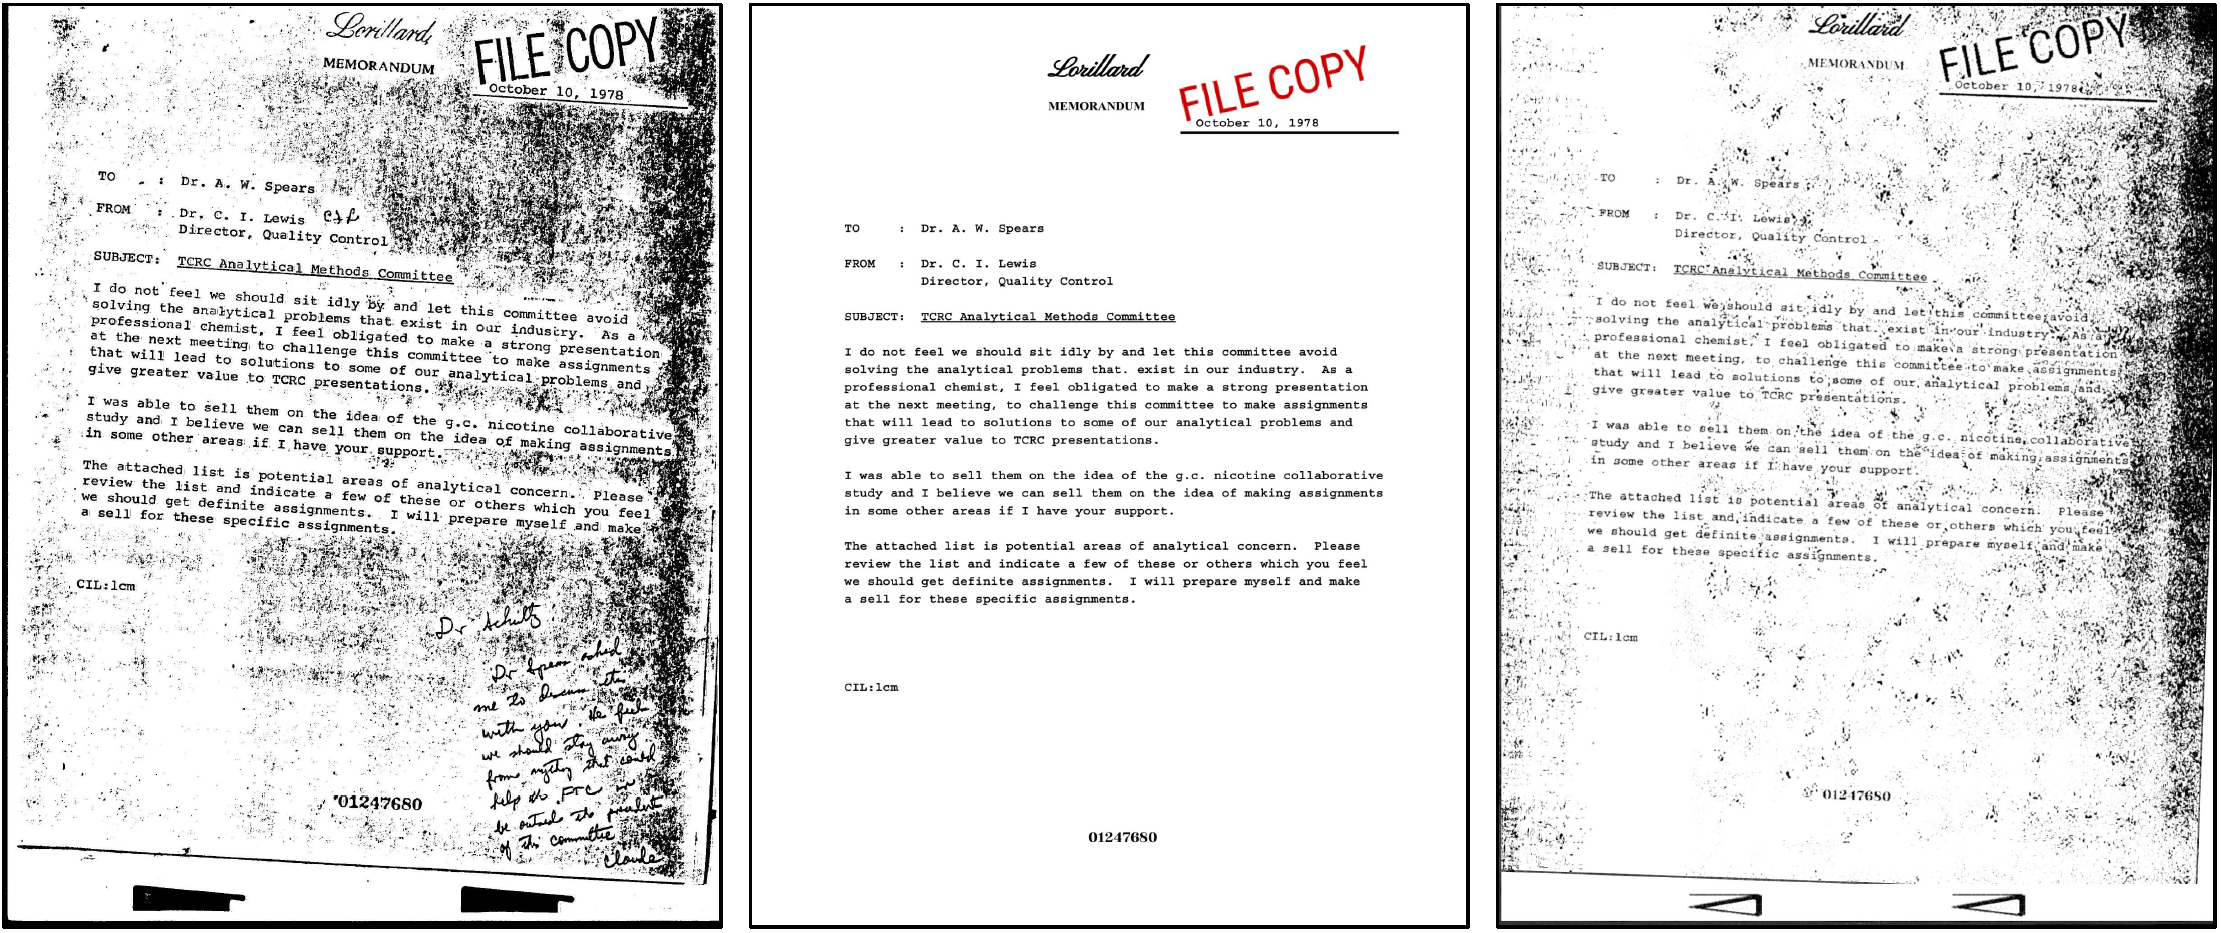 Examples of Augraphy-generated document images